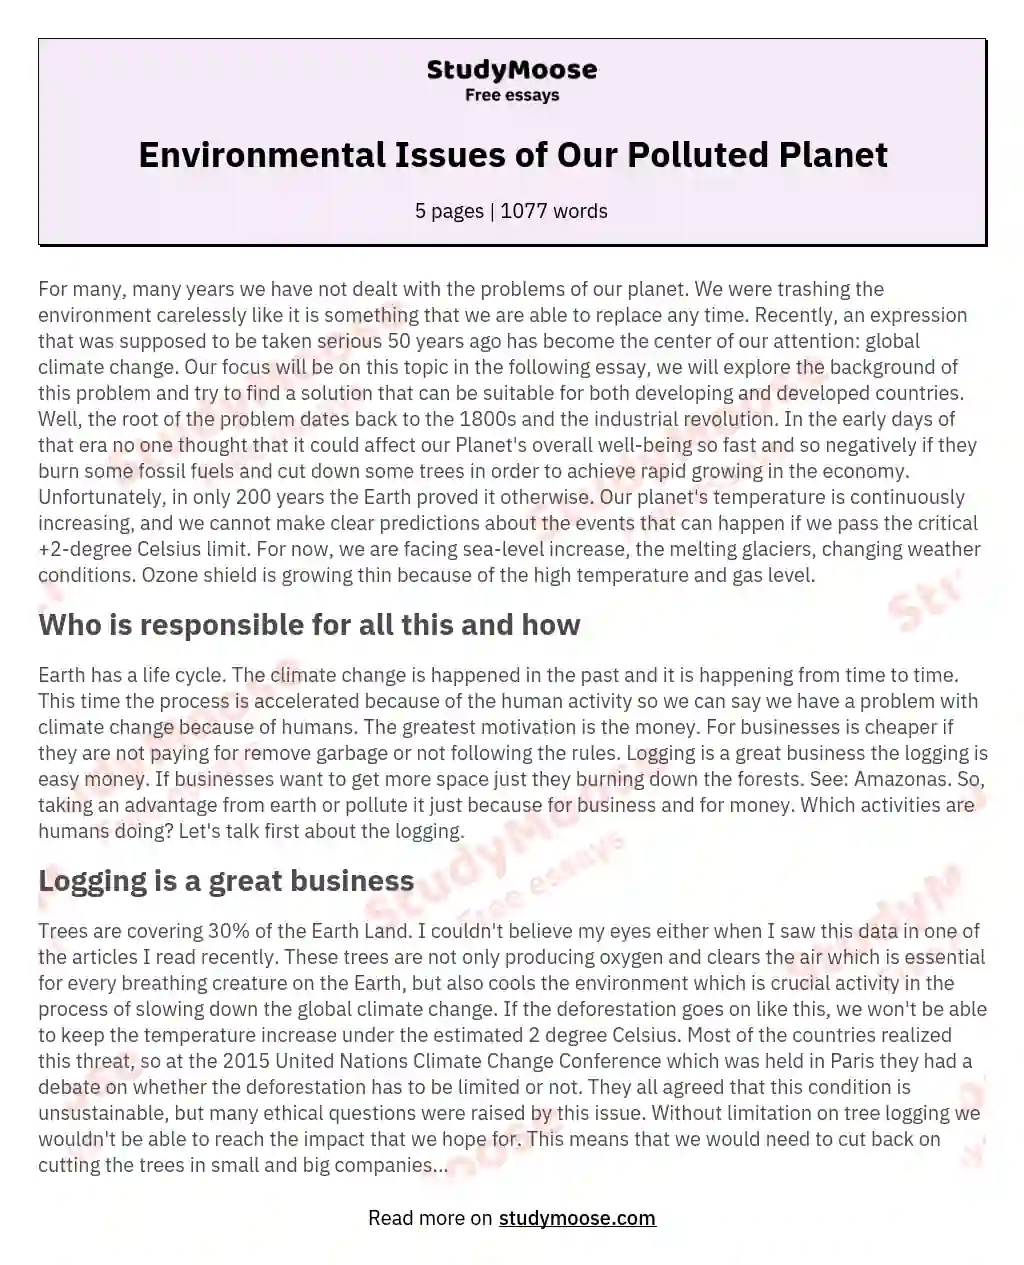 Environmental Issues of Our Polluted Planet essay